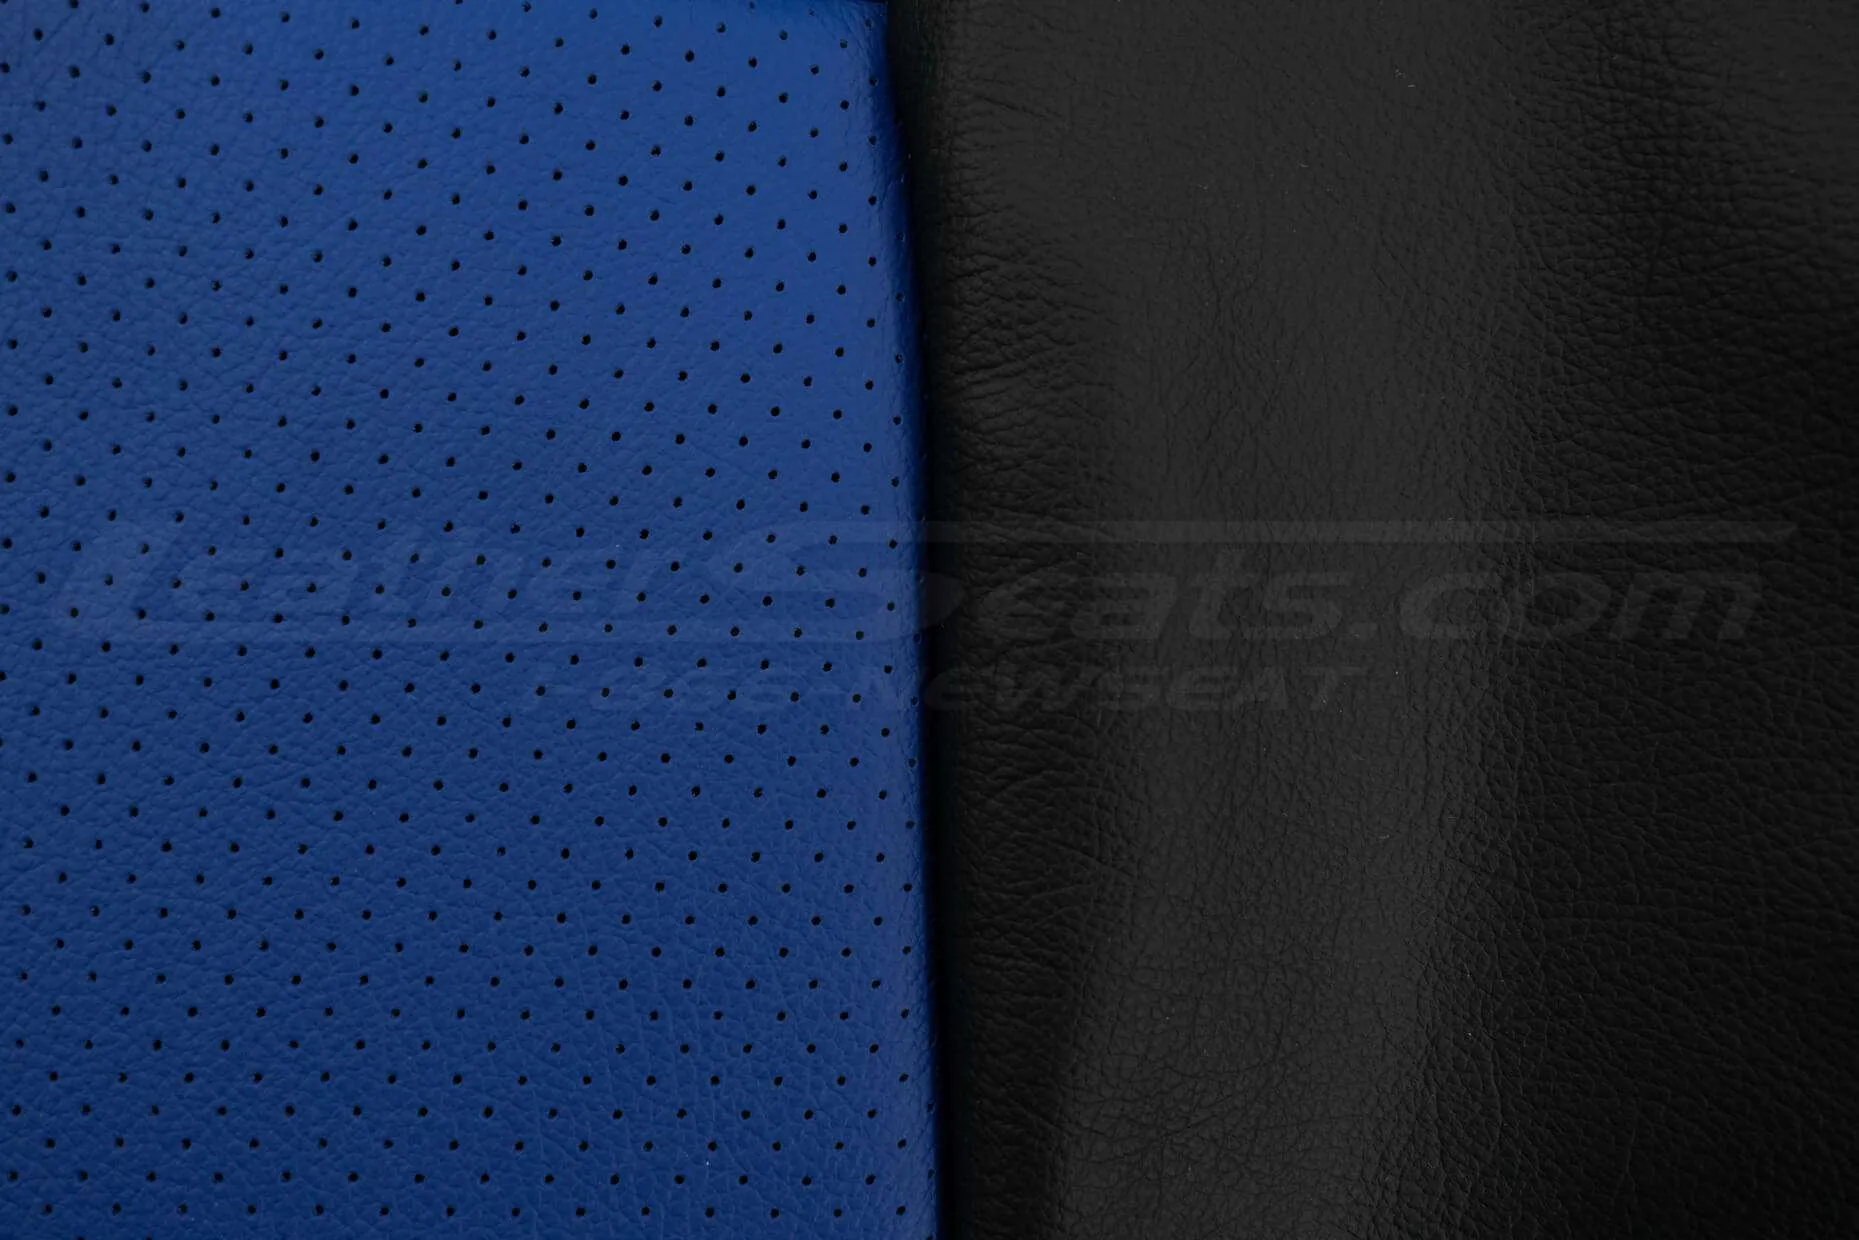 Chevrolet SSR Upholstery Kit - Black & Cobalt - Texture comparison between perforation and leather